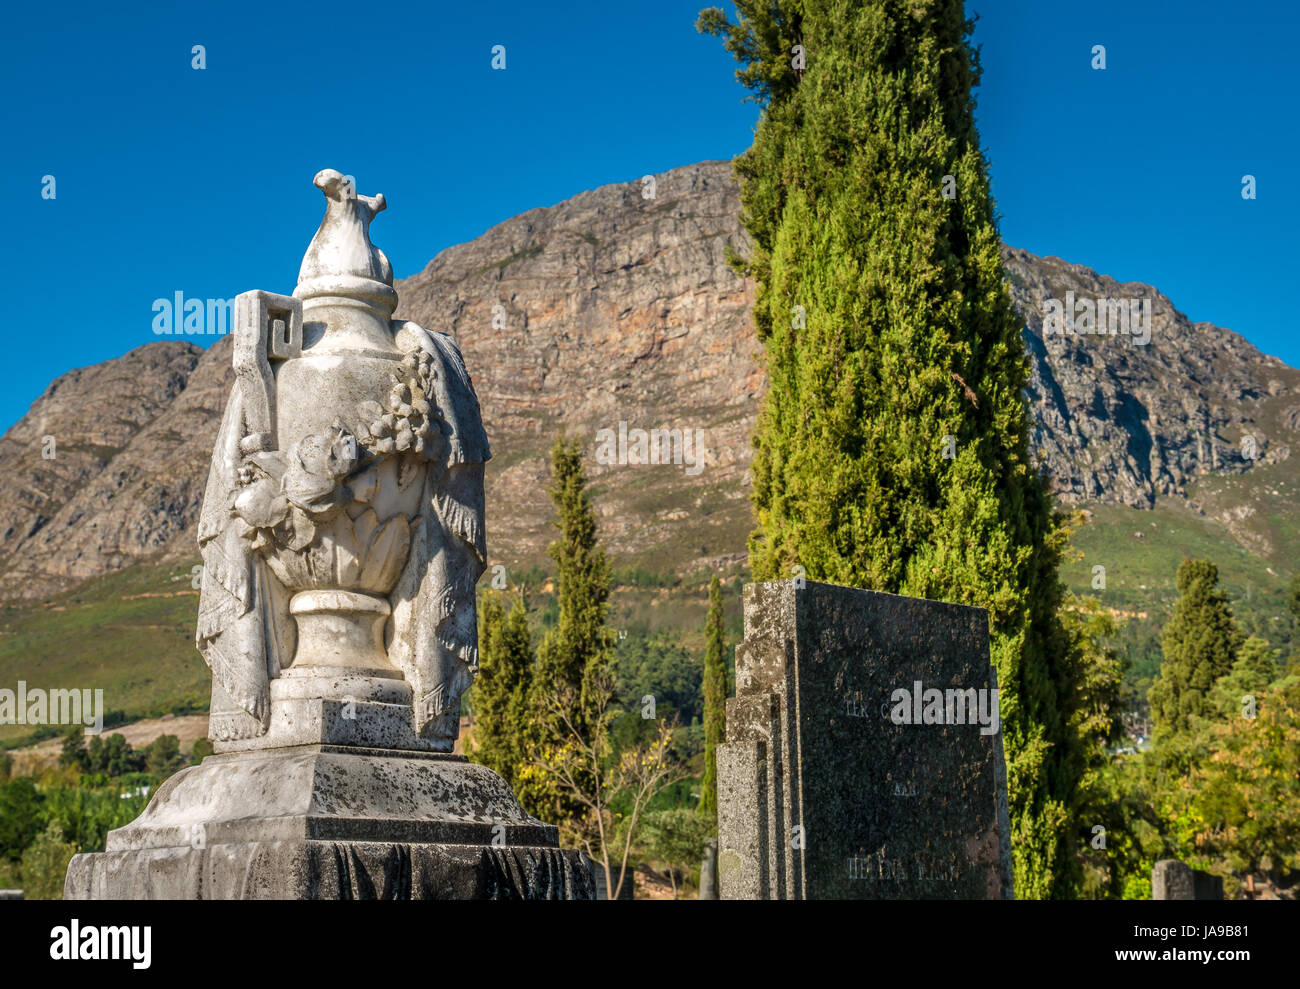 Symbolic draped urn gravestone memorial, French Huguenot cemetery, Franschhoek, Western Cape, South Africa, with mountain backdrop Stock Photo